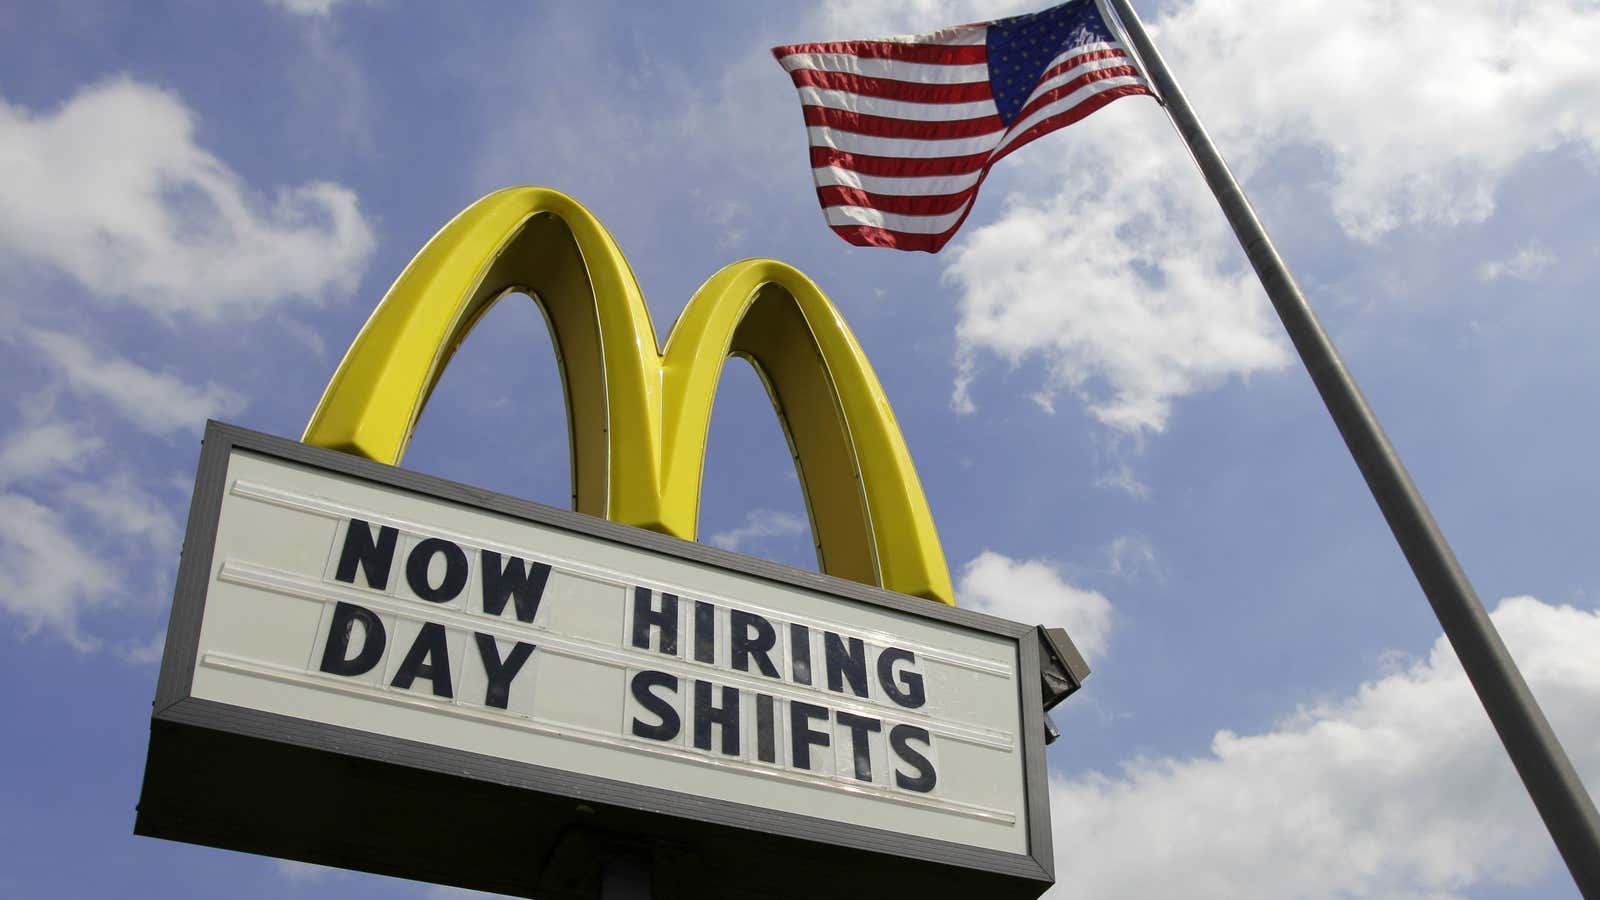 McDonald’s in Australia is using Snapchat as part of its job applications in hopes of hiring more young employees.